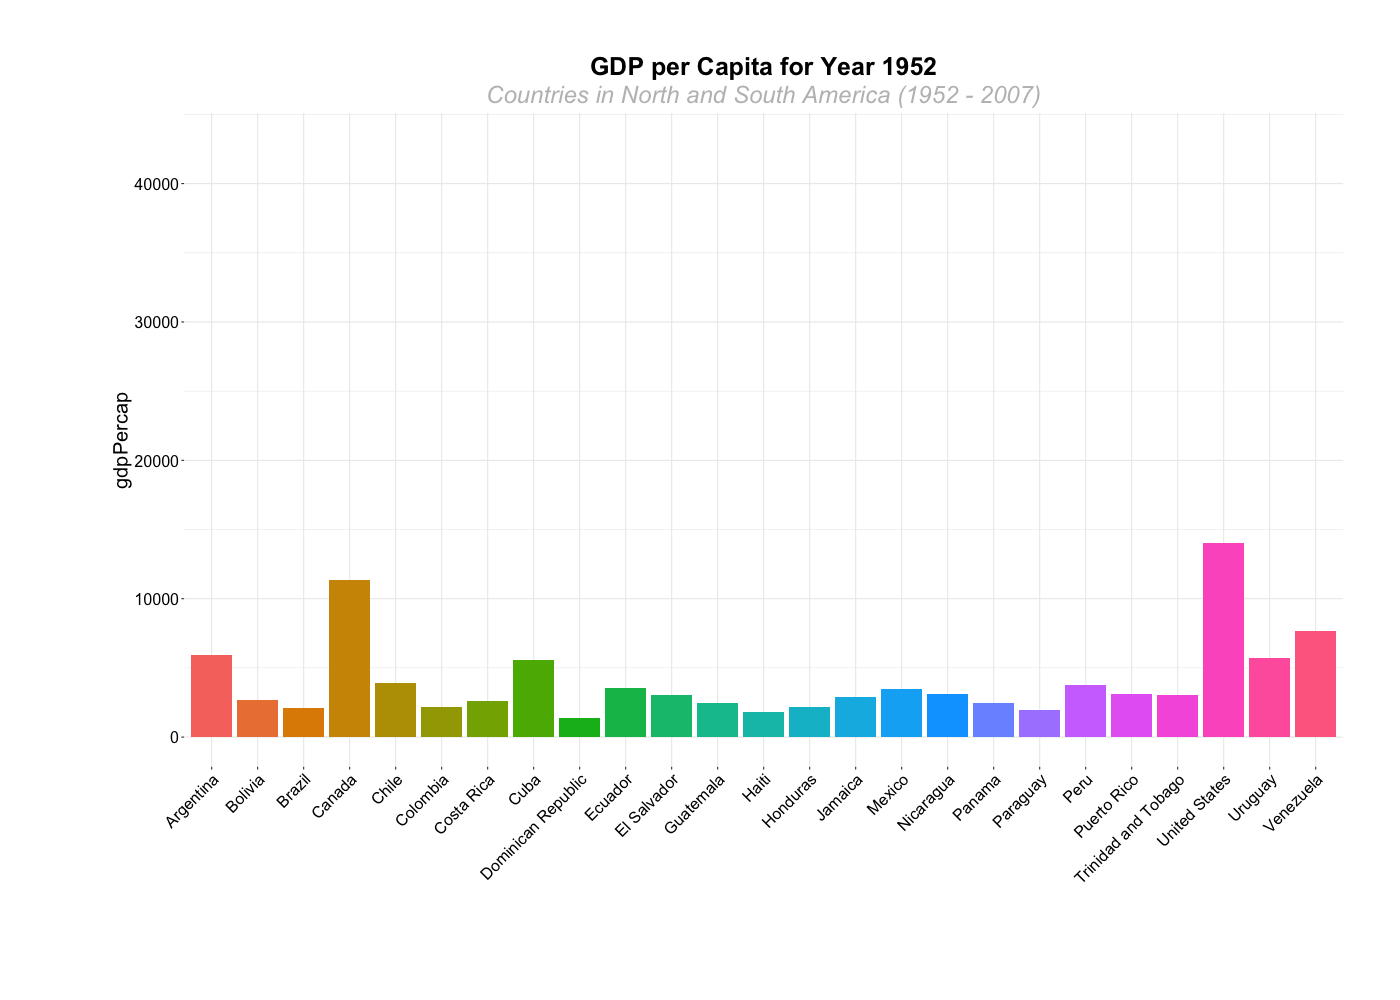 Bar graph of GDP per capita, animated over time